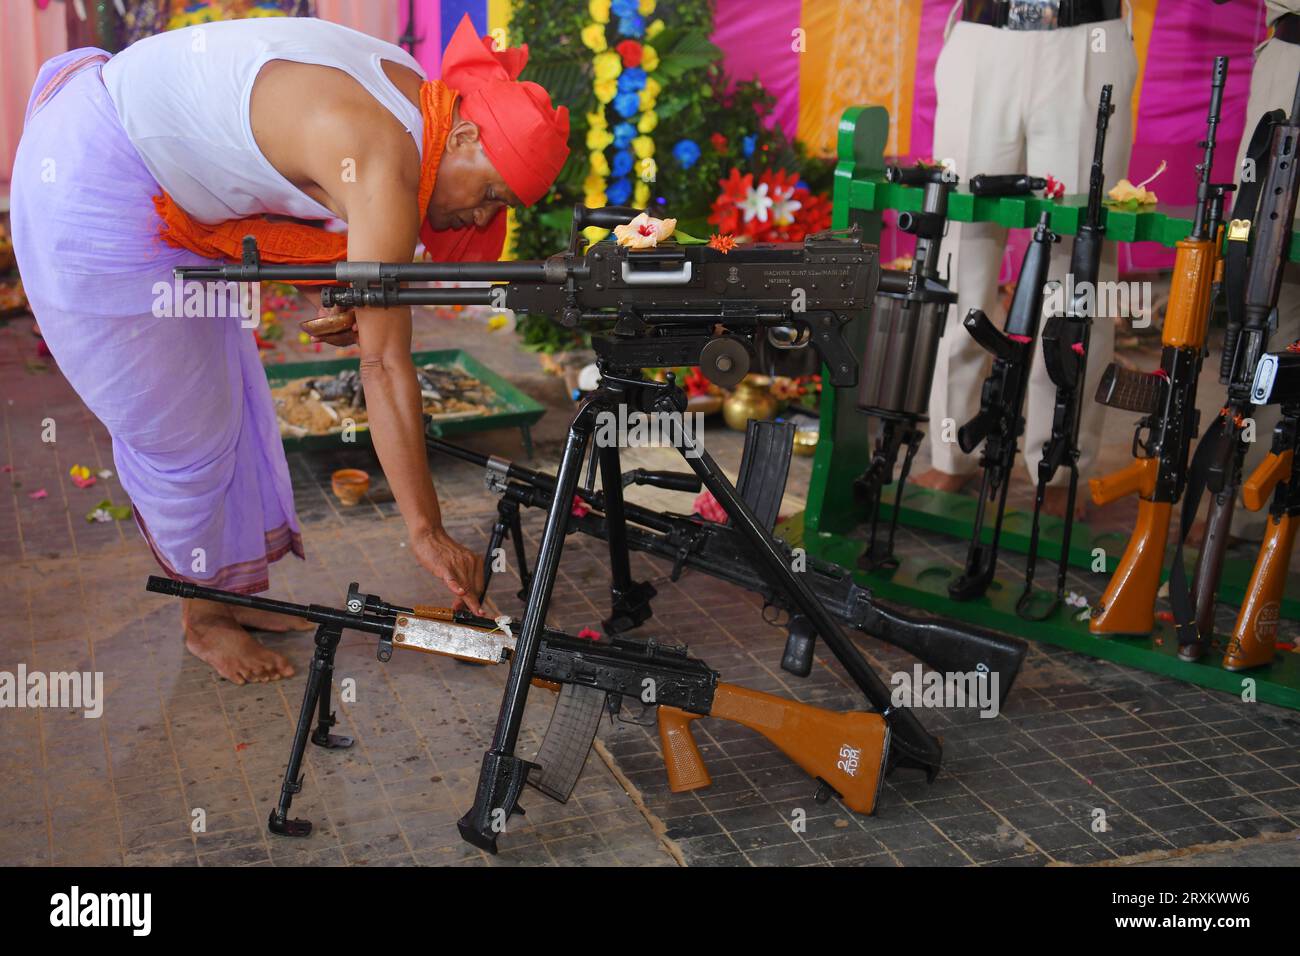 A priest performs worship of arms on Vishwakarma Puja in a TSR (Tripura State Rifles) camp on the outskirts of Agartala. According to Hindus, Vishwakarma is the Divine Engineer of the world. On this day, Hindu people worship their vehicles, tools, machineries etc and celebrate them. Tripura, India. Stock Photo